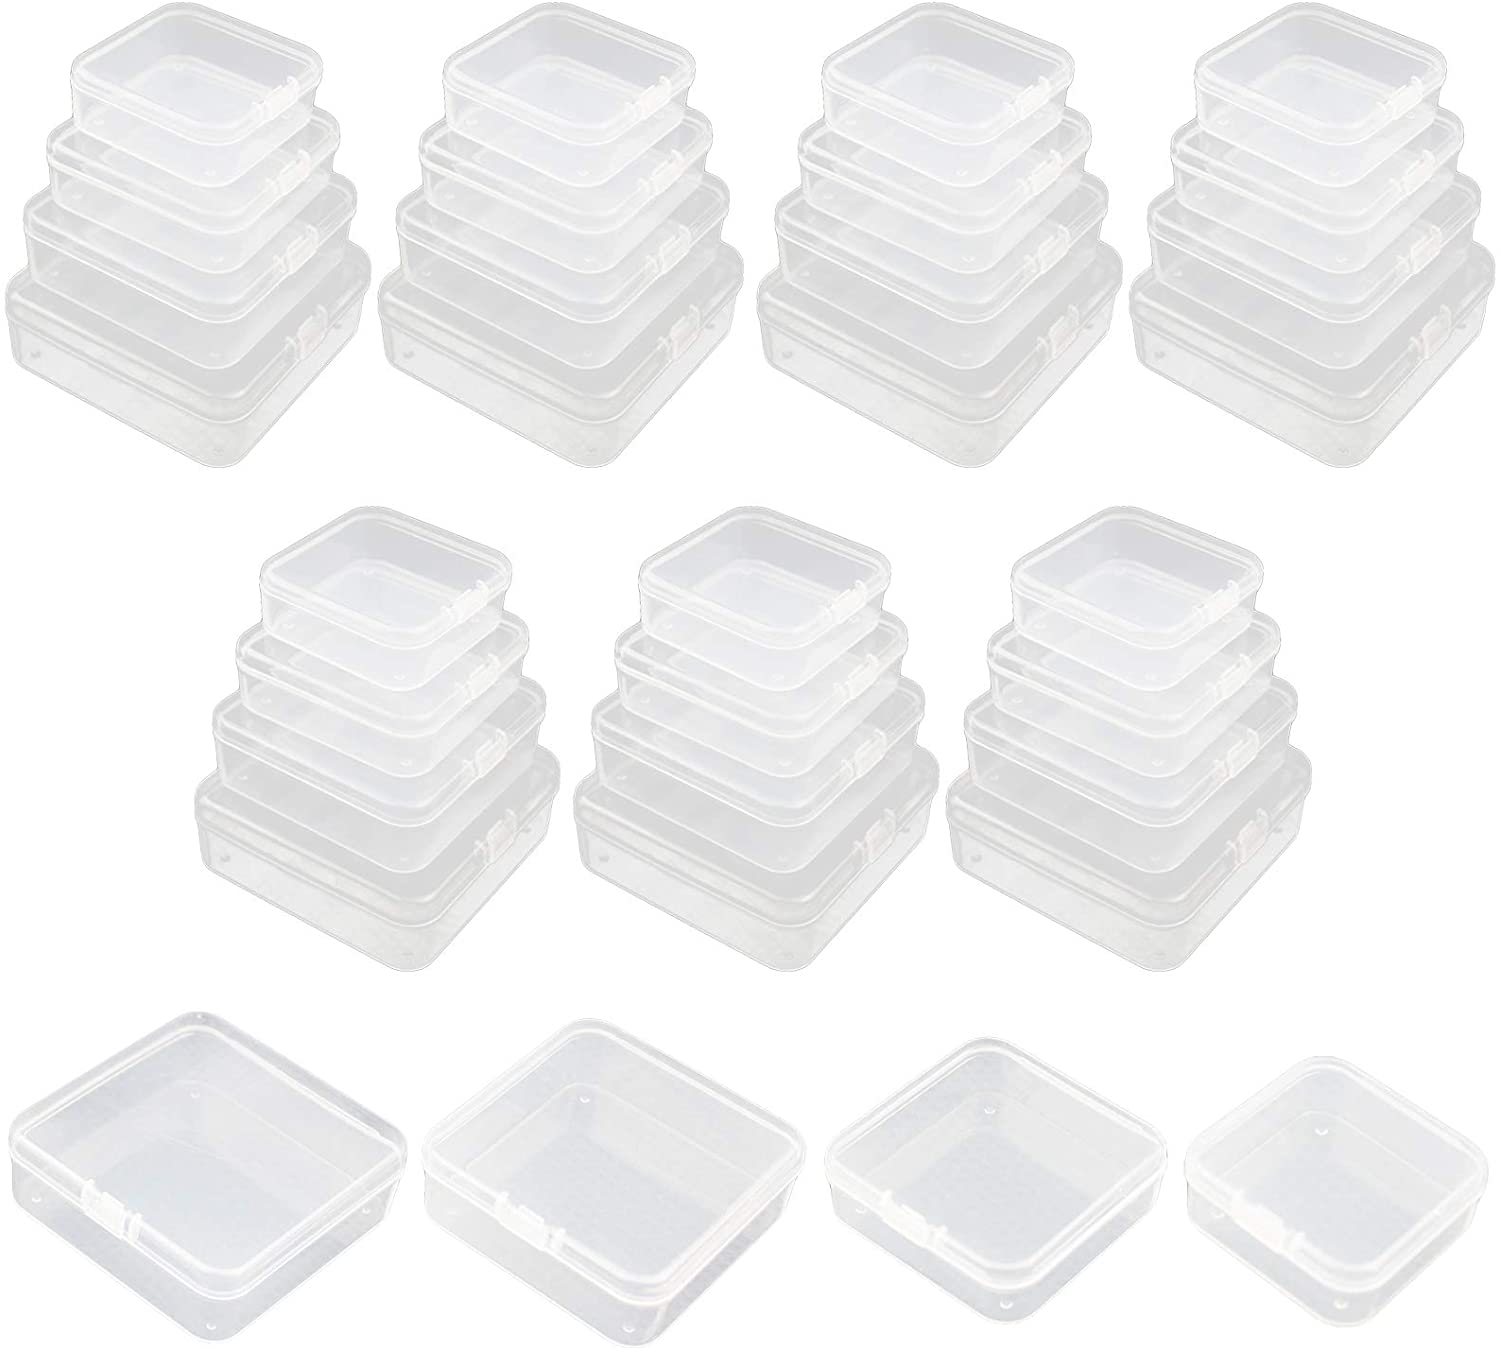 LJY 32 Pieces Mixed Sizes Square Empty Mini Clear Plastic Storage  Containers Box Case with Lids for Small Items and Other Craft Projects LJY  Technology Inc Official Website